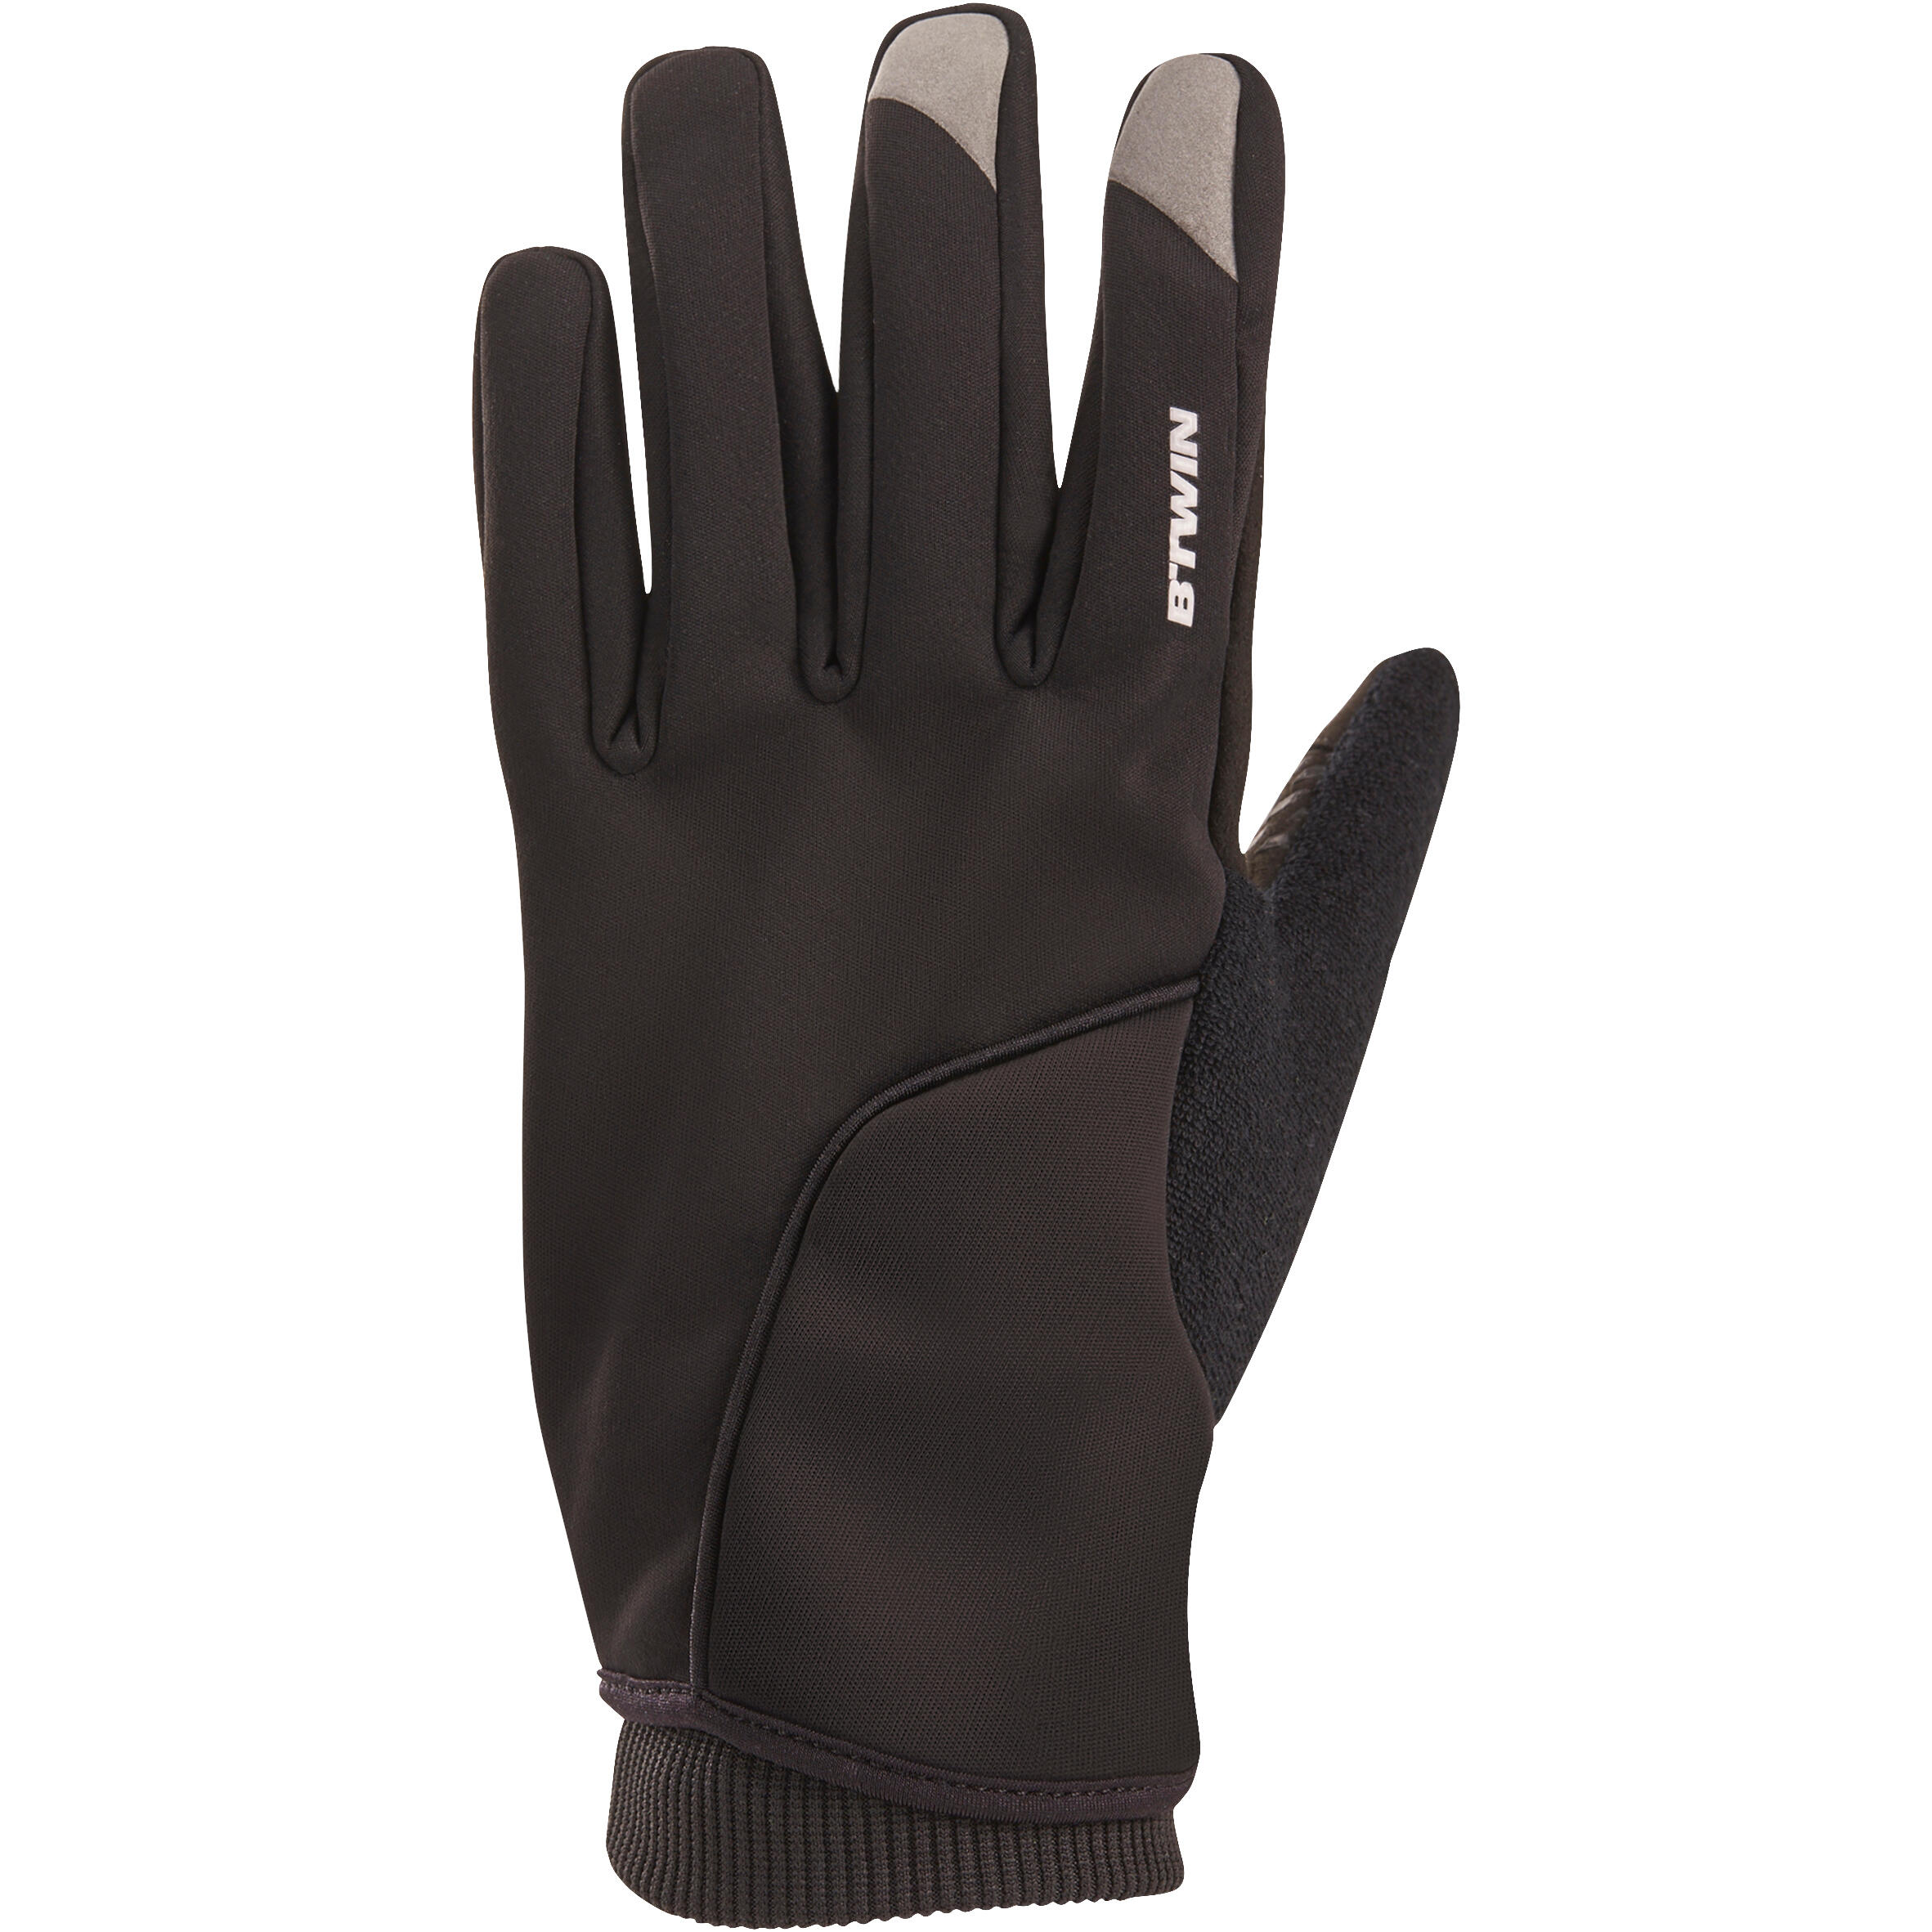 RC 500 Thermal Cycling Gloves - Black 1/12